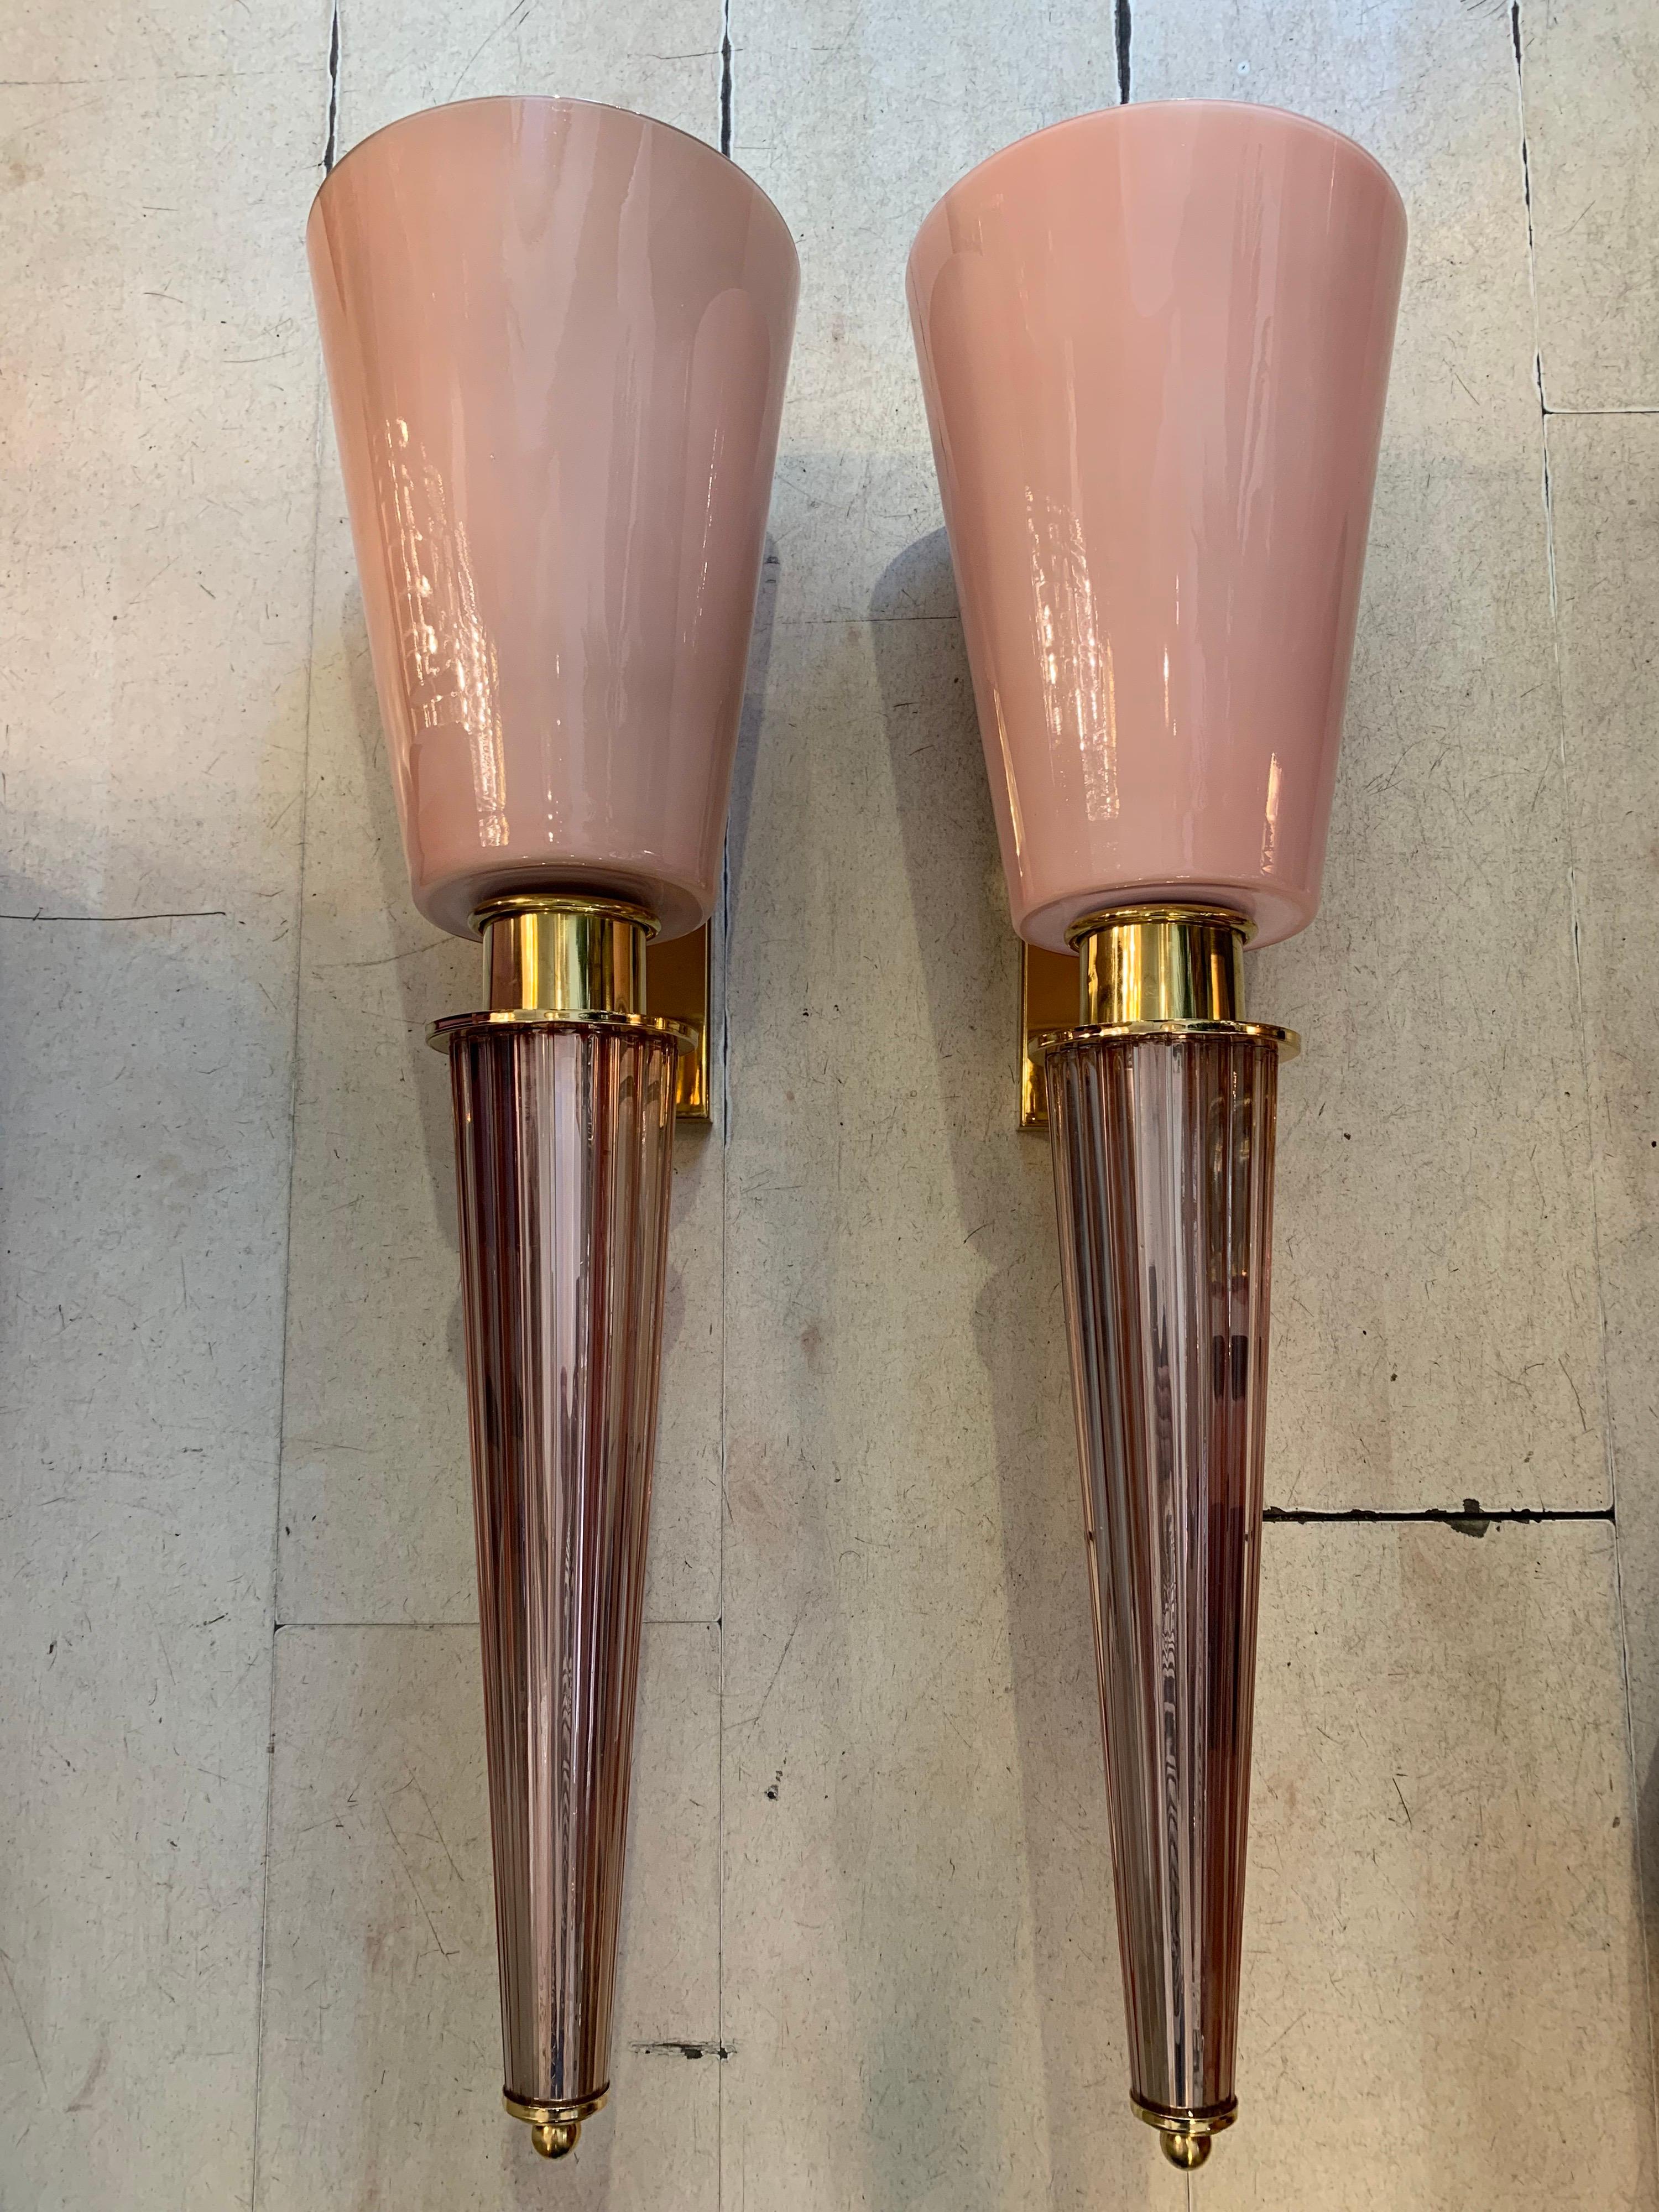 Pair of Art Deco pink conical Murano Glass wall sconces, brass fittings. The cup is 